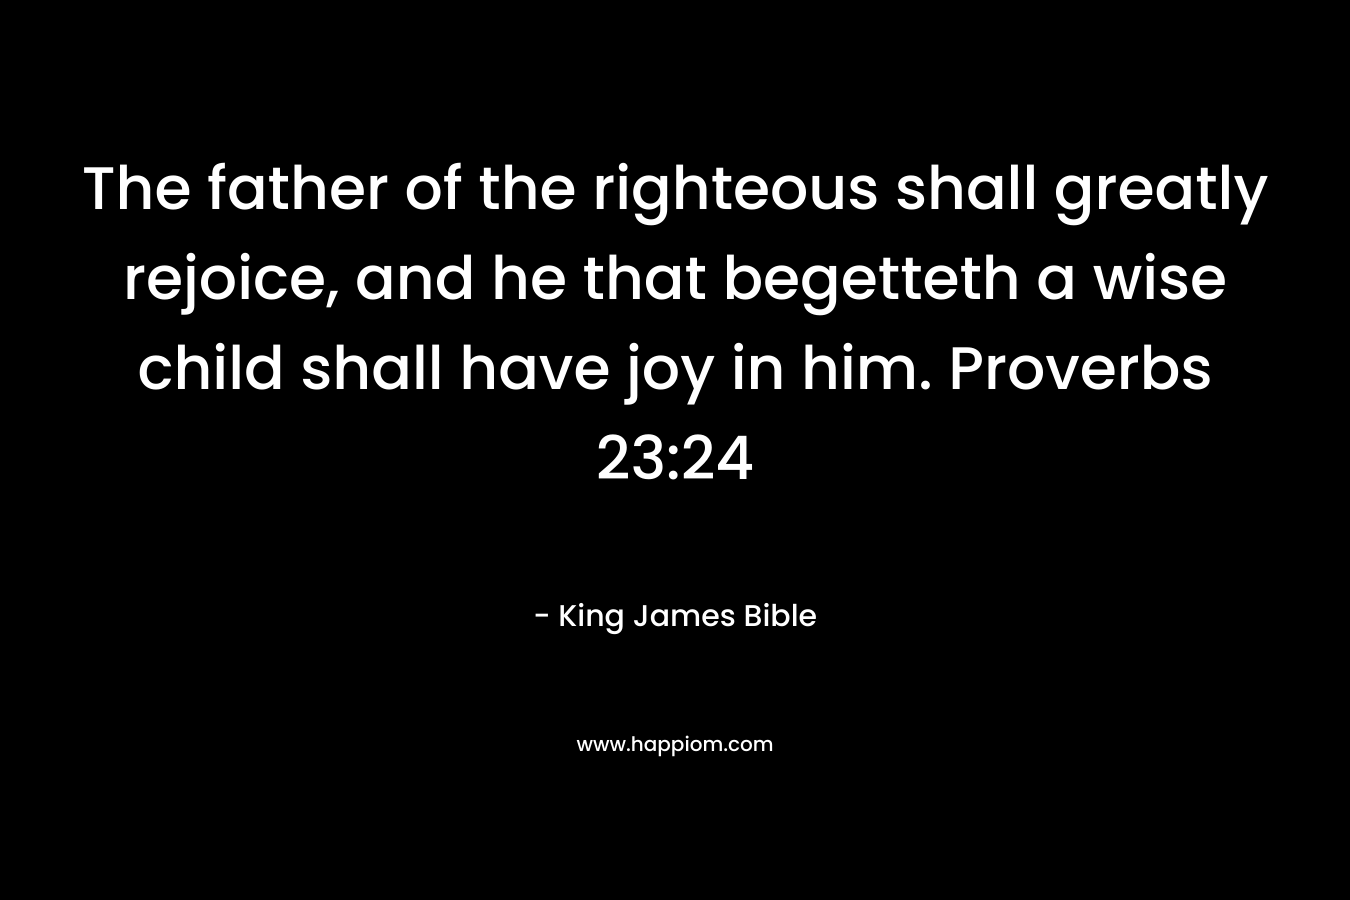 The father of the righteous shall greatly rejoice, and he that begetteth a wise child shall have joy in him. Proverbs 23:24